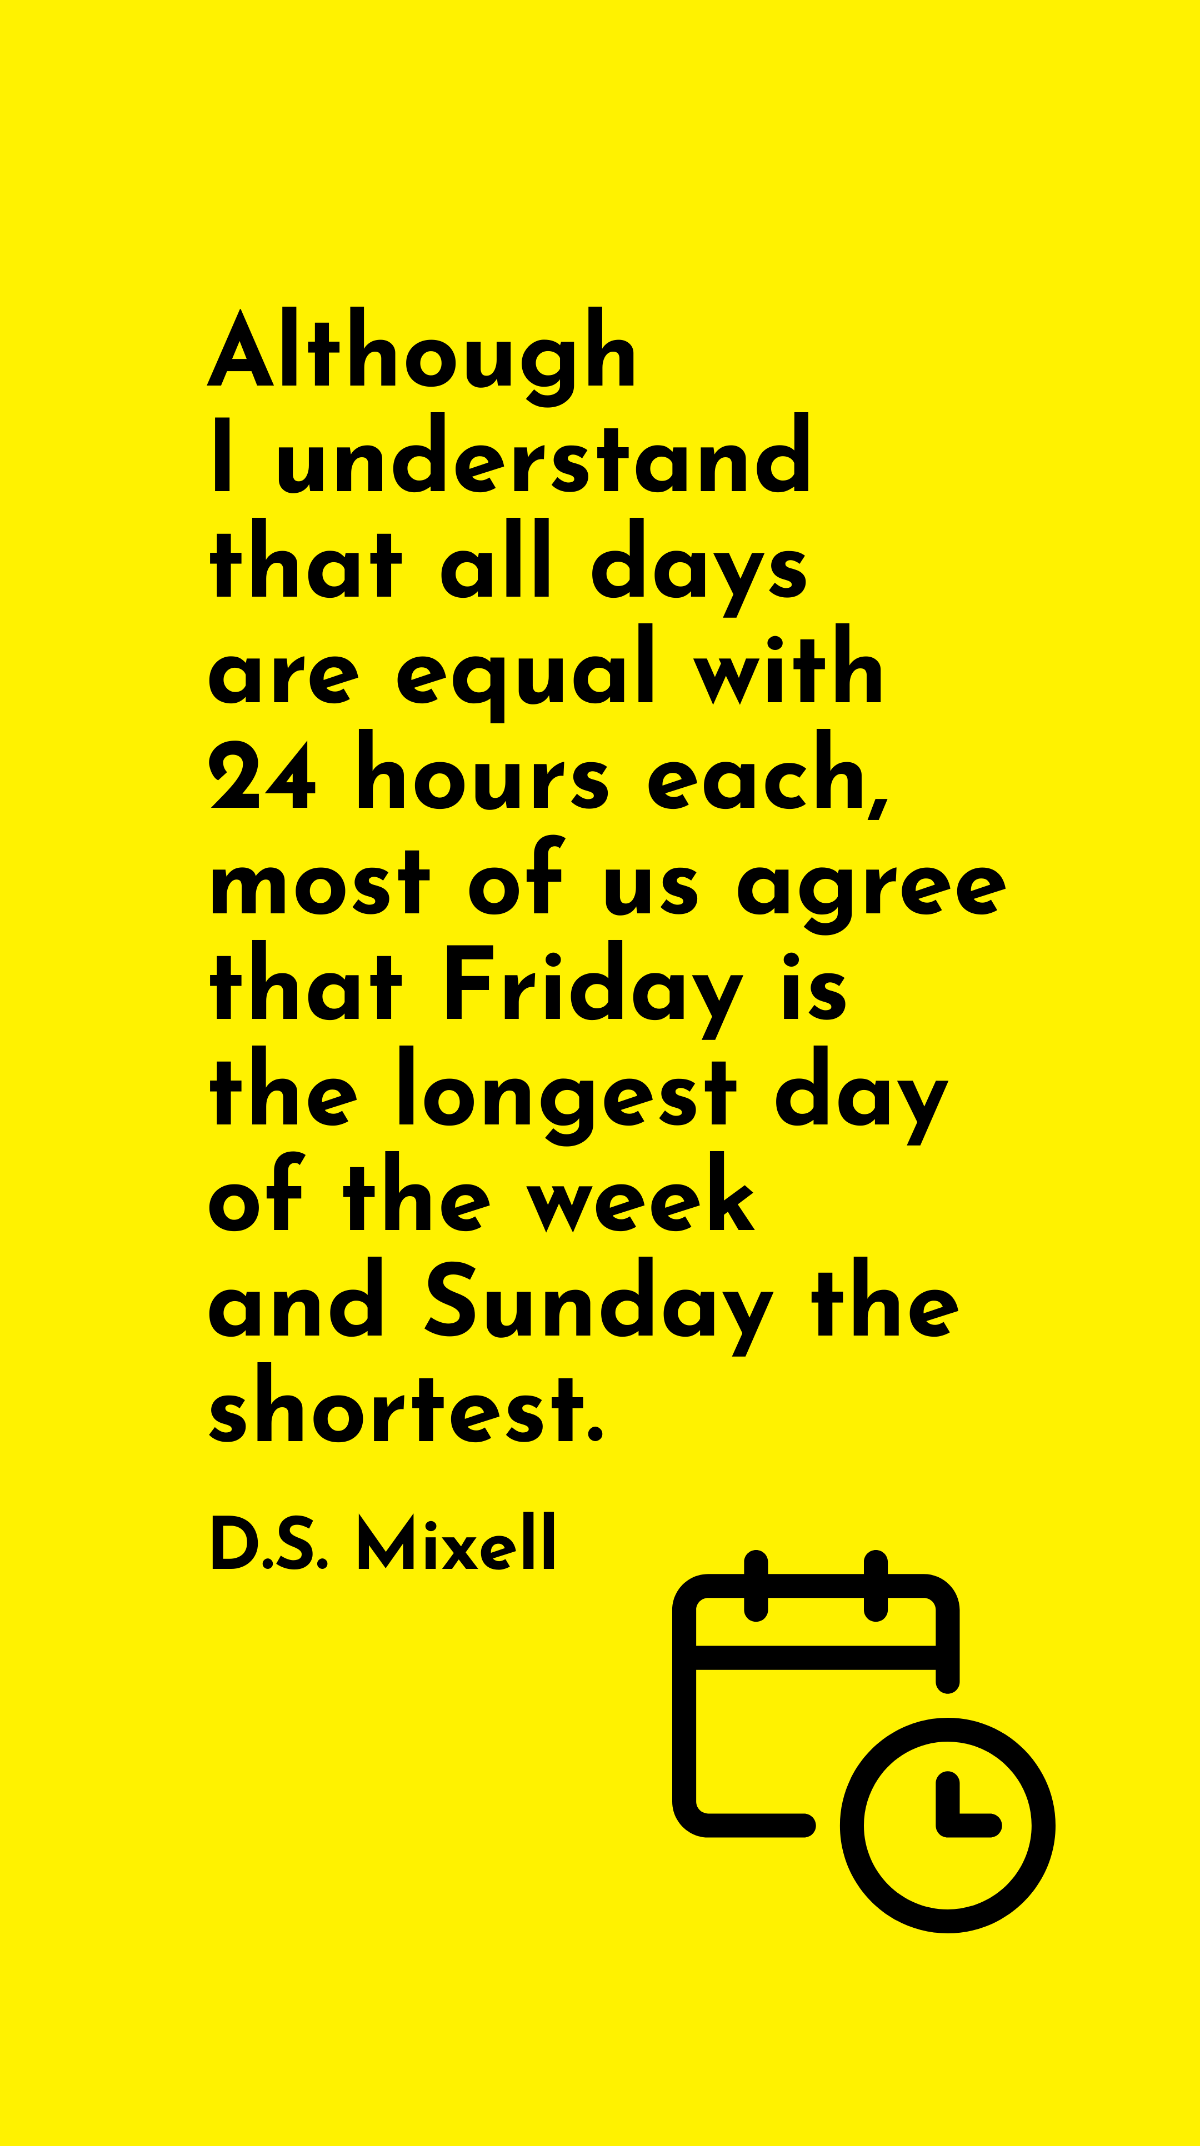 D.S. Mixell - Although I understand that all days are equal with 24 hours each, most of us agree that Friday is the longest day of the week and Sunday the shortest. Template